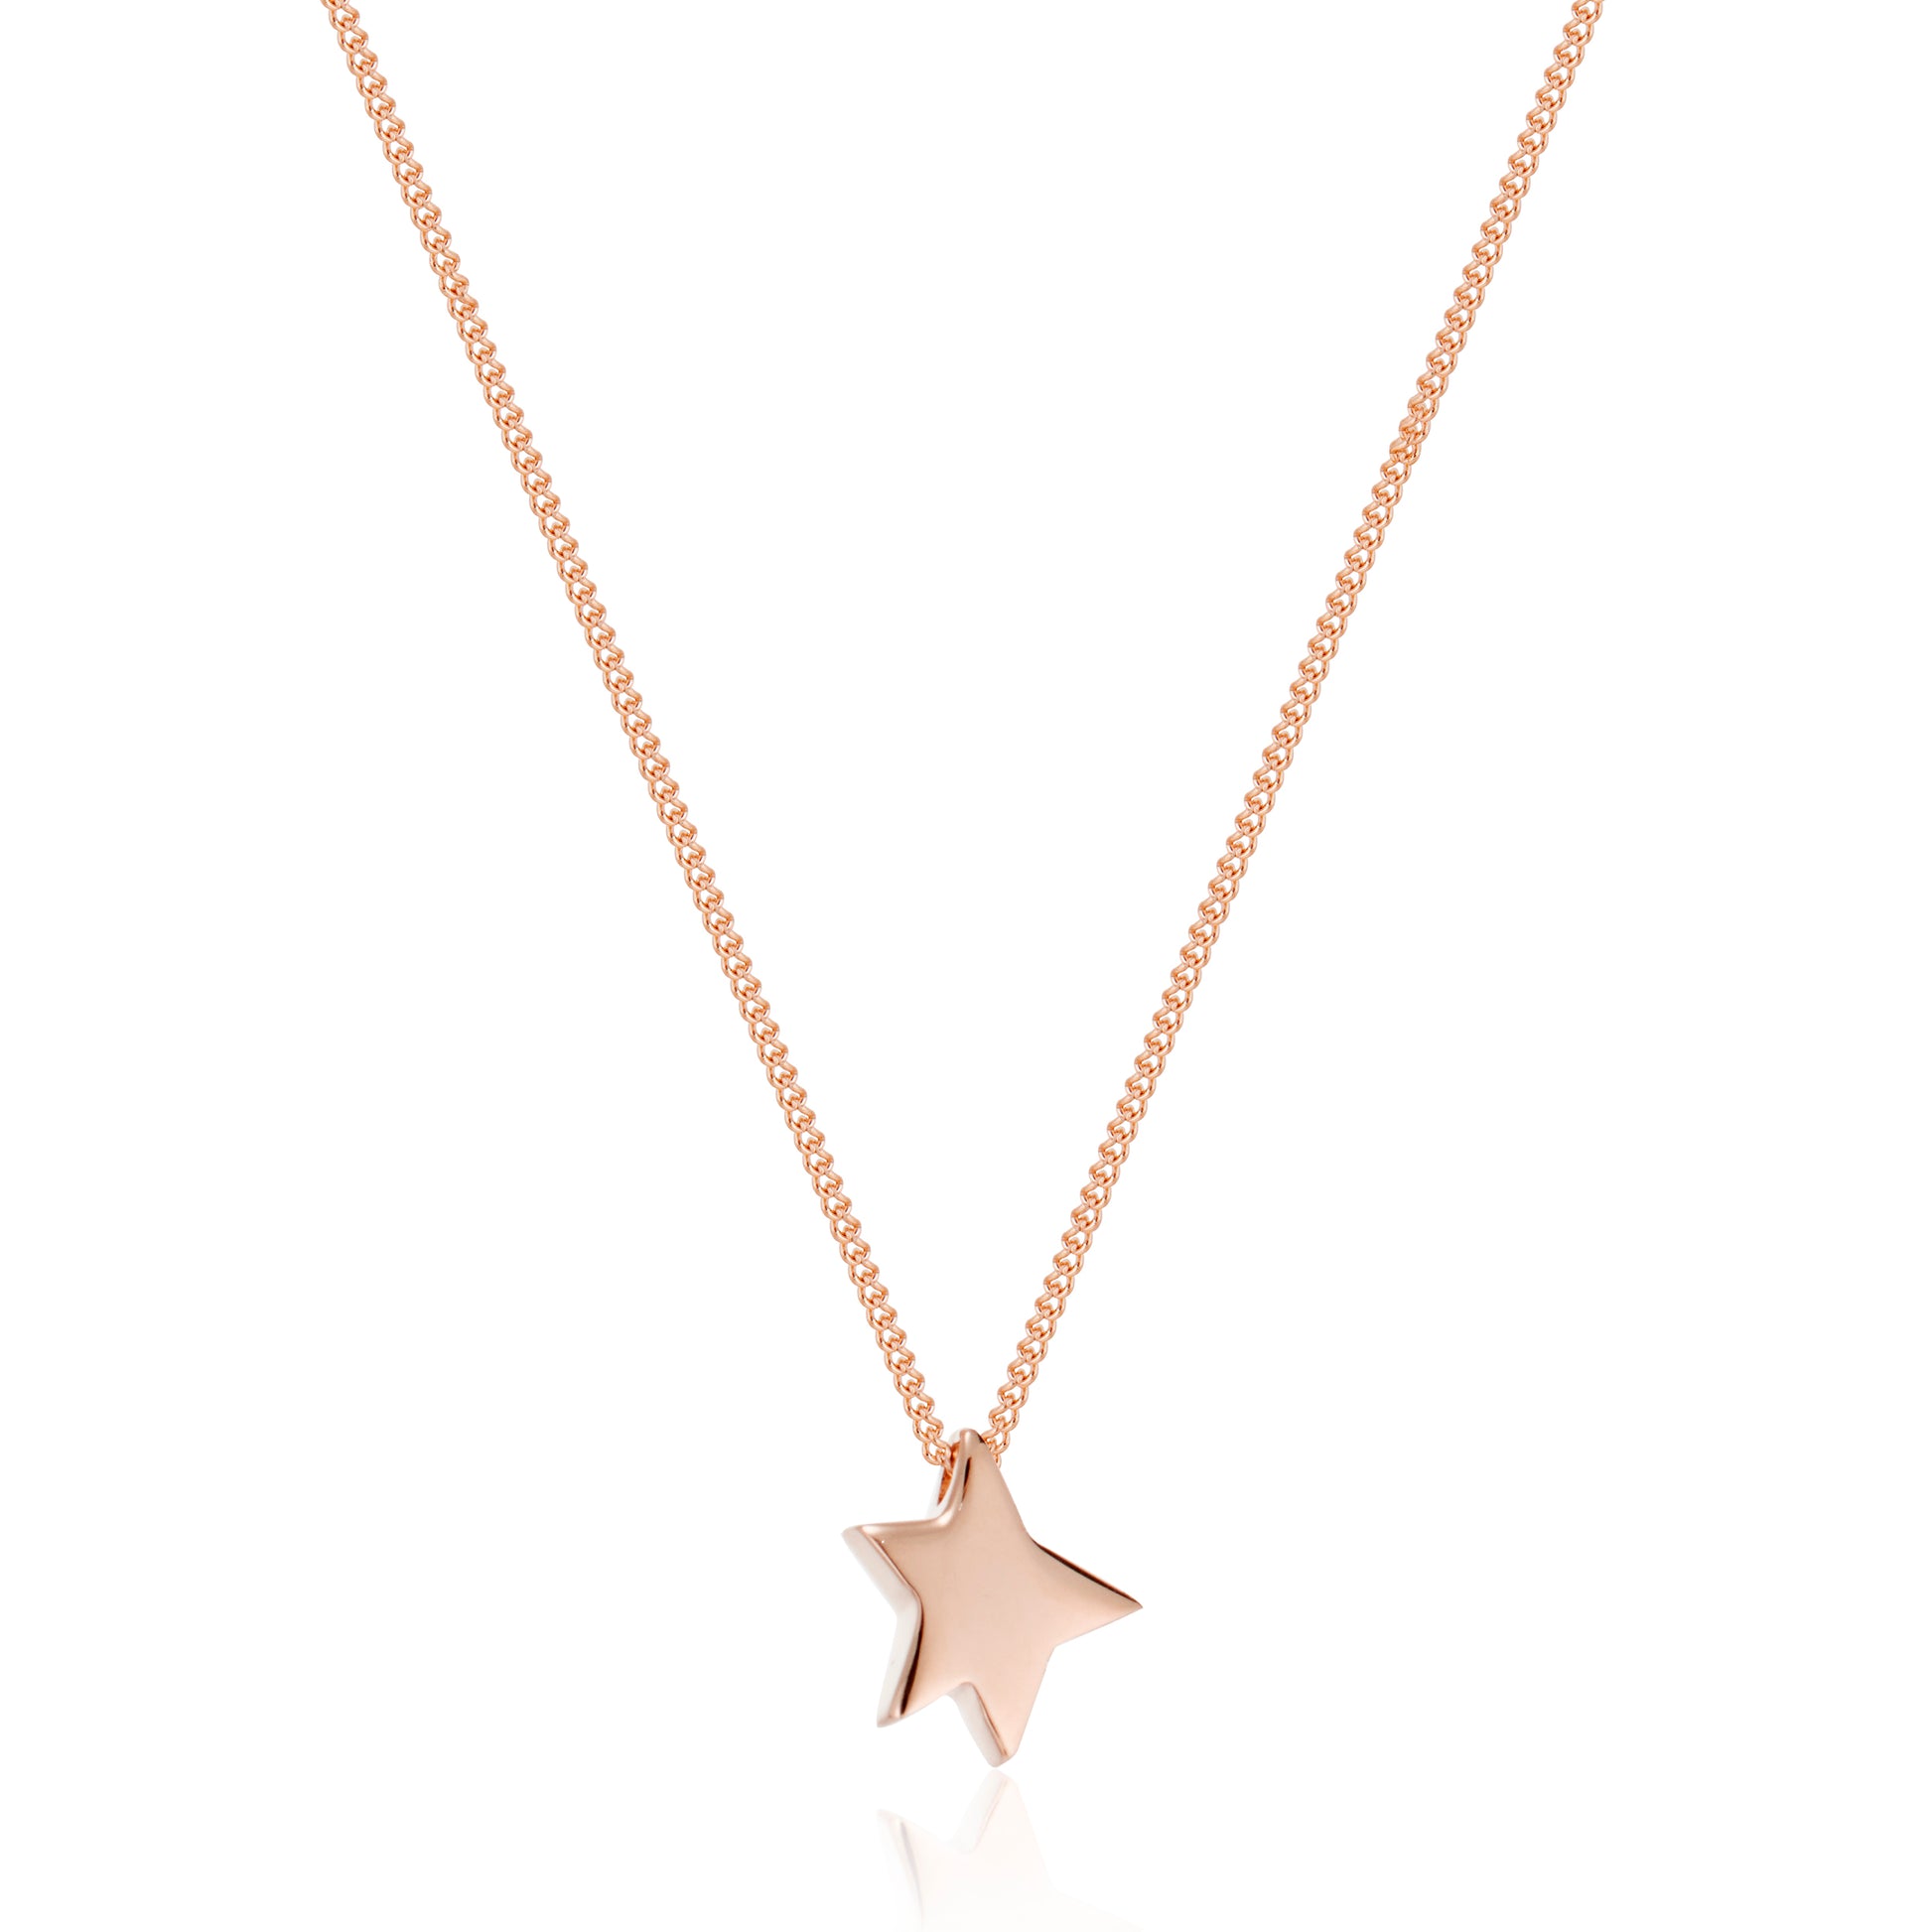 Étoile Mini Star Necklace from Serena Van Rensselaer x Le Petit Prince© Collection